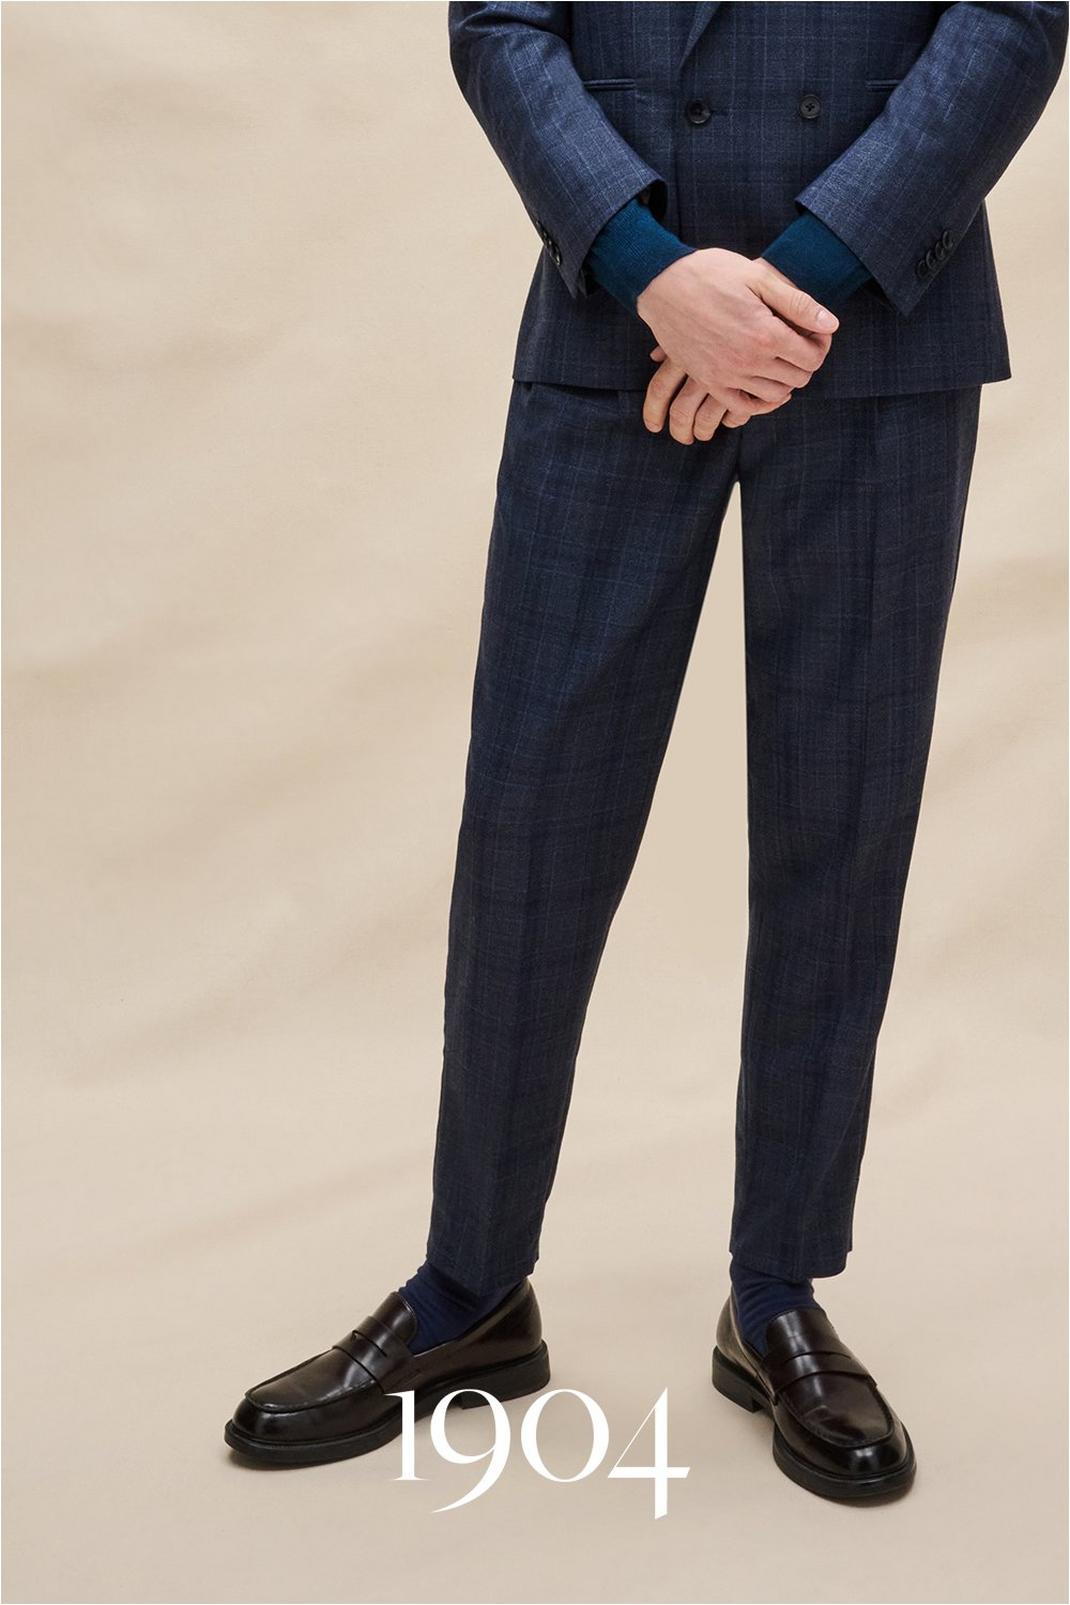 1904 Tapered Fit Navy Tonal Check Trouser image number 1